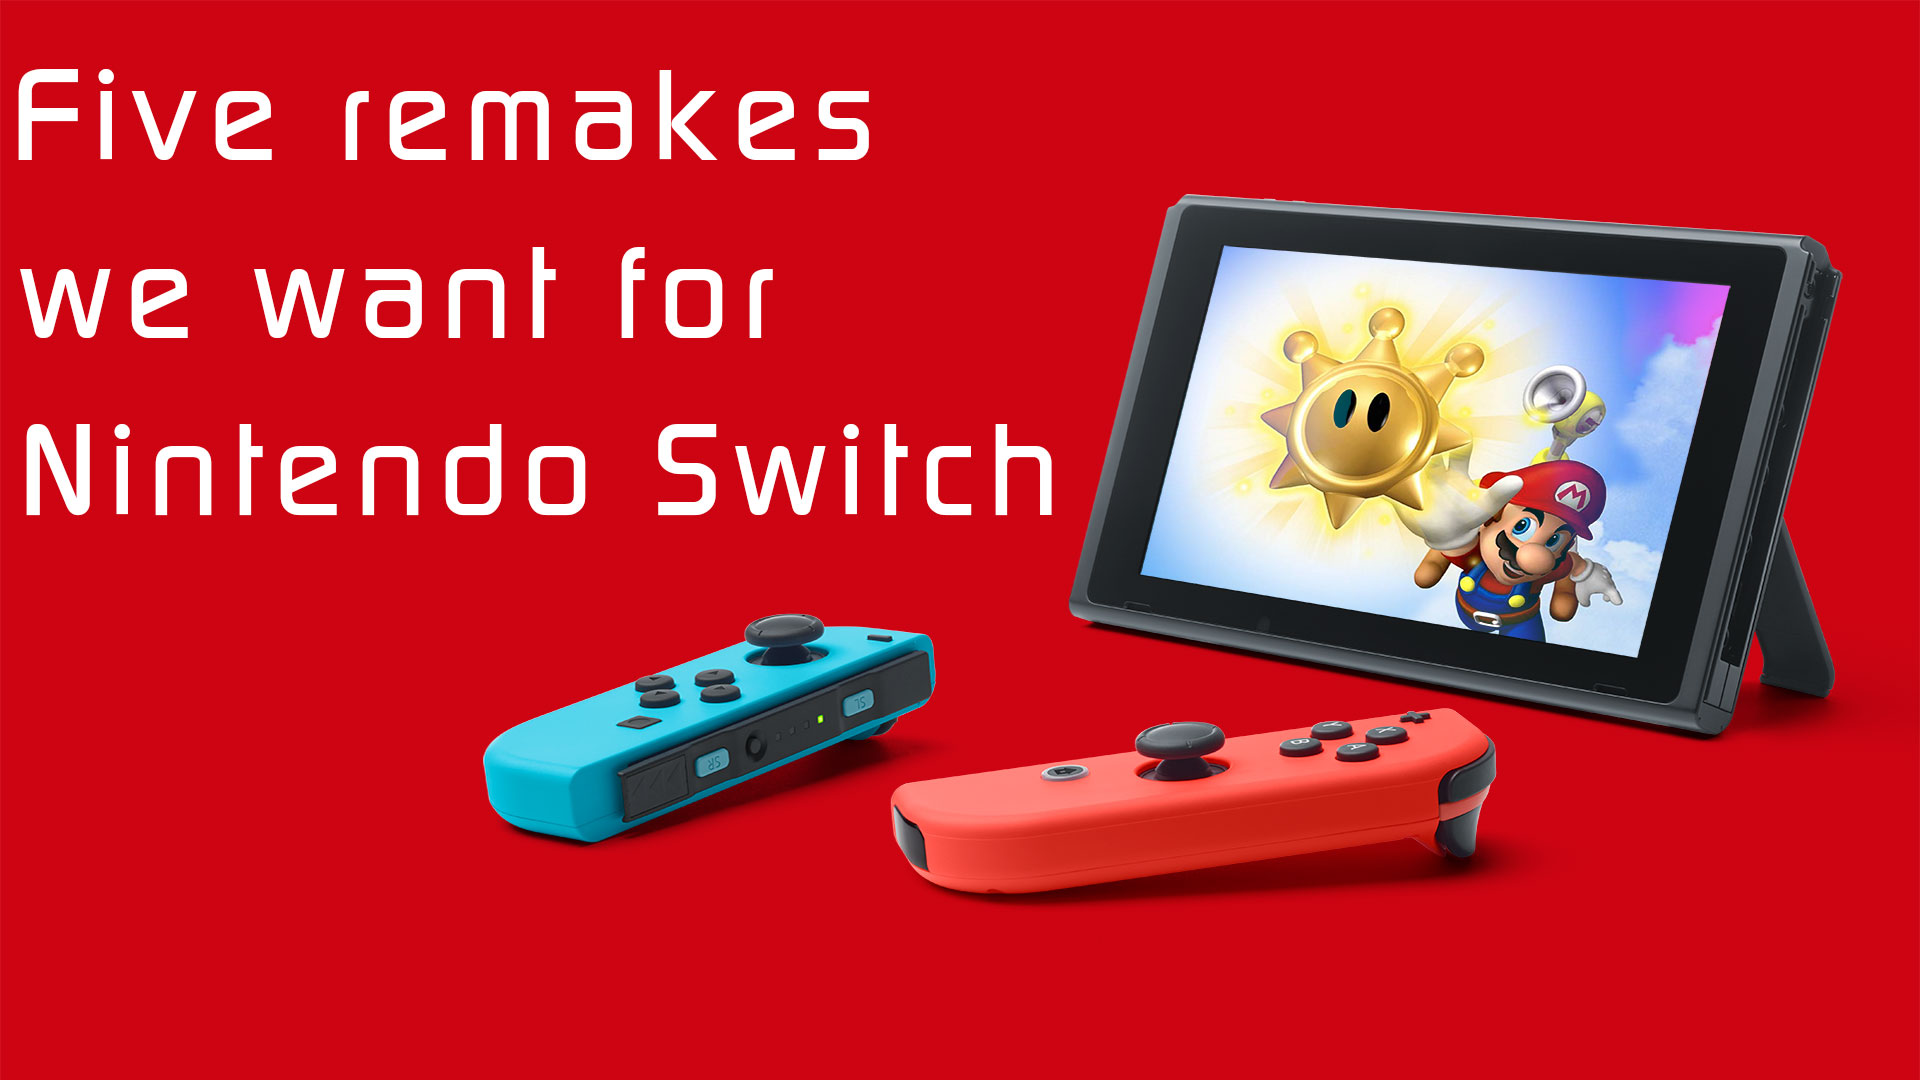 Five remakes we want for the Nintendo Switch